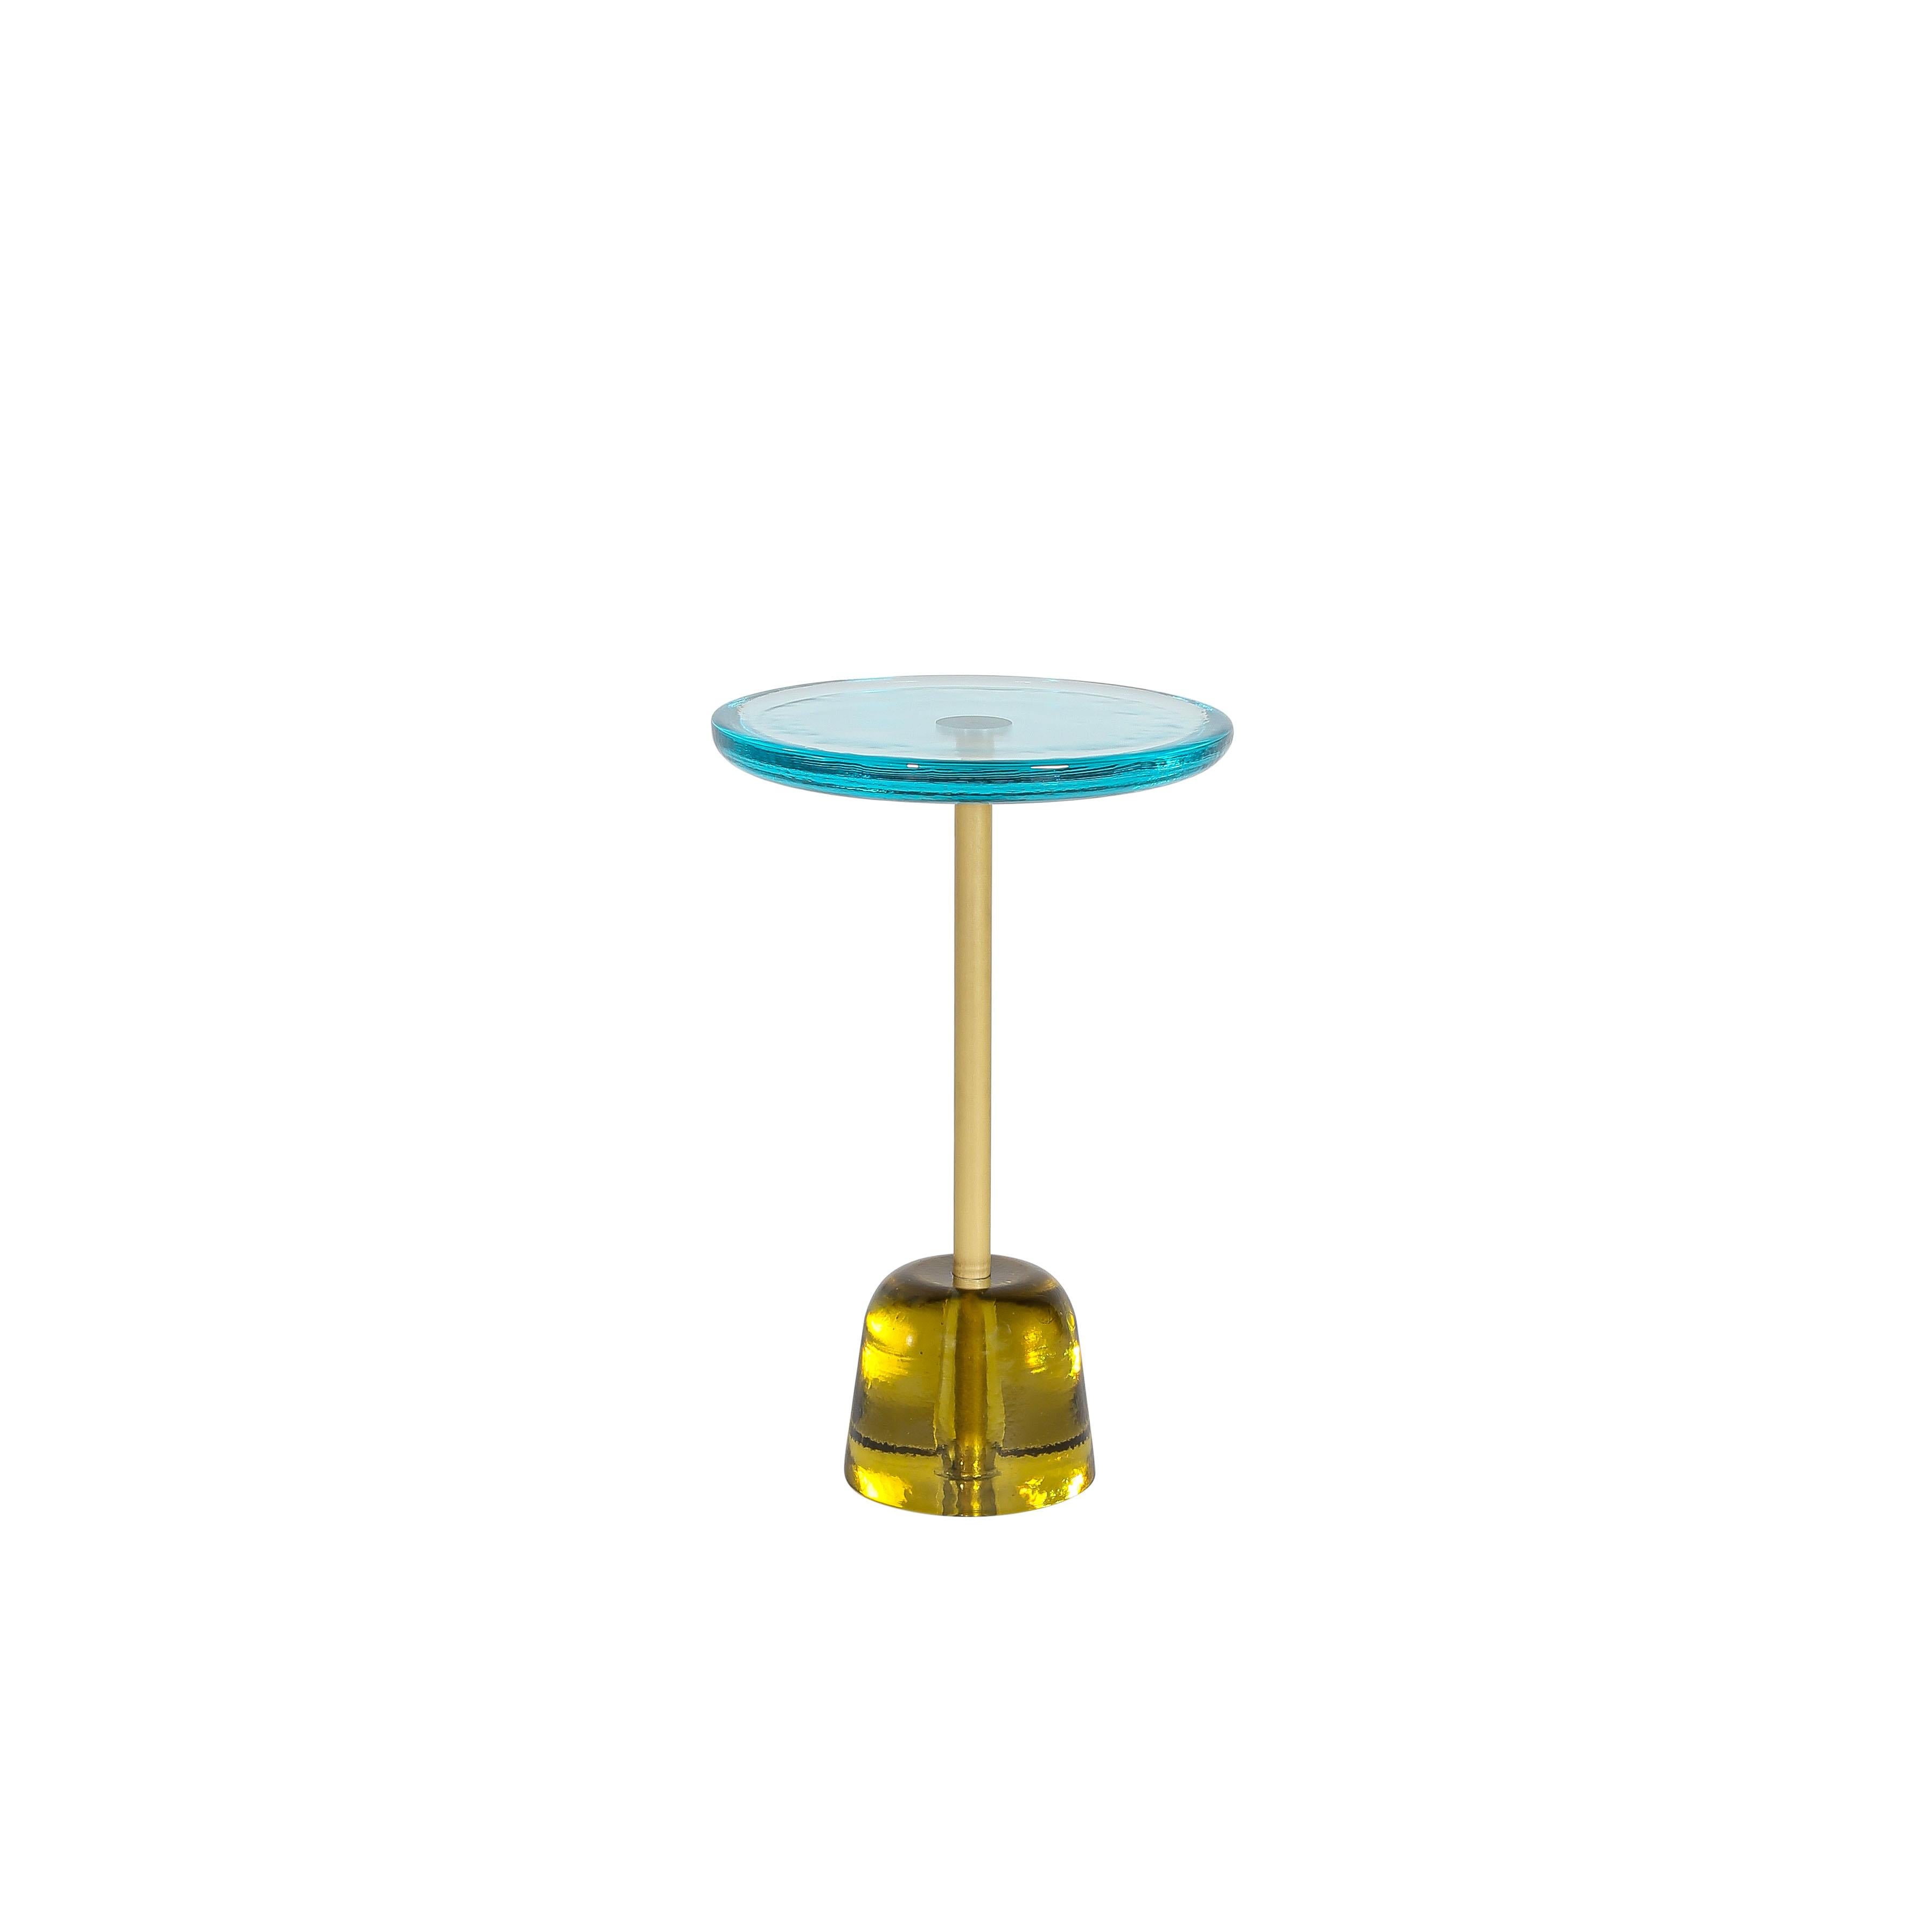 Pina high aqua blue brass side table by Pulpo
Dimensions: D34 x H52 cm
Materials: glass; brass and steel

Also available in different colours. 

Sebastian Herkner’s distinctively tall, skinny side table series pina is inspired by the abstract